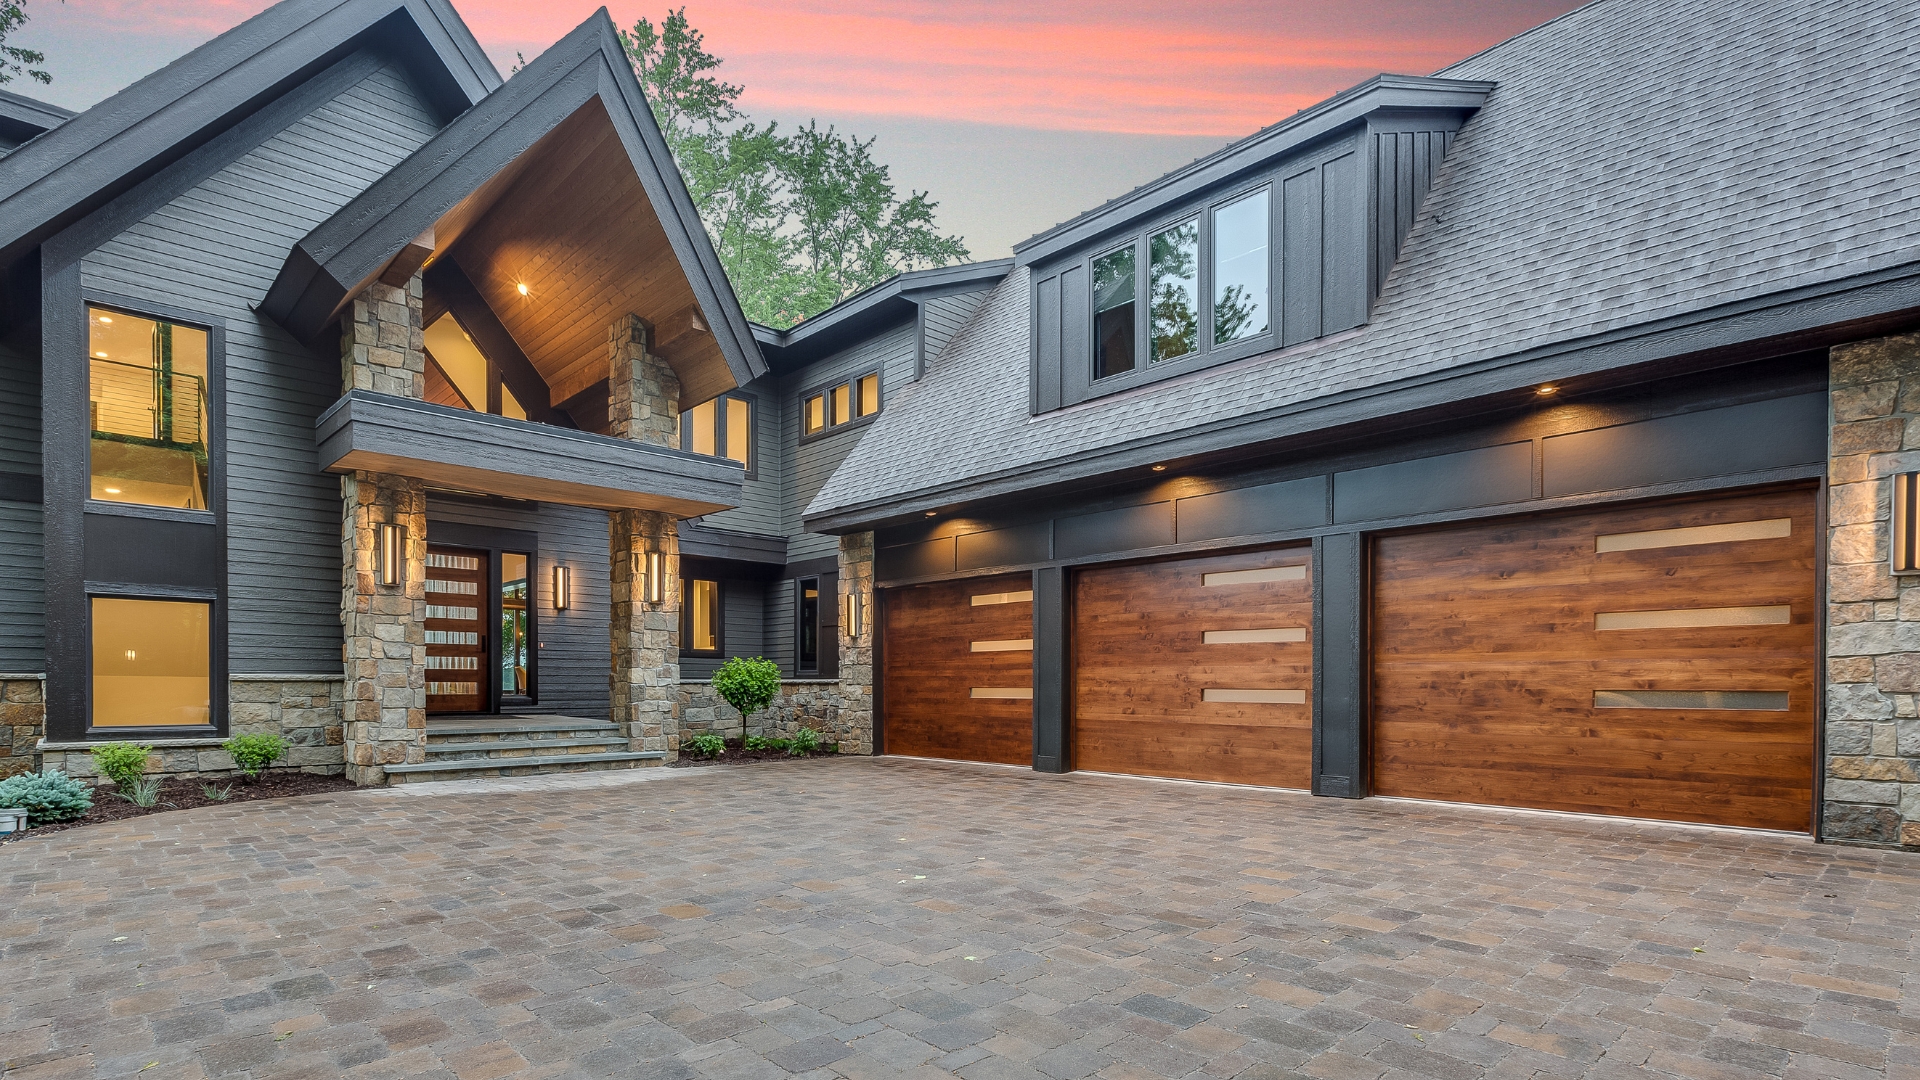 A house with garage doors in natural wood color